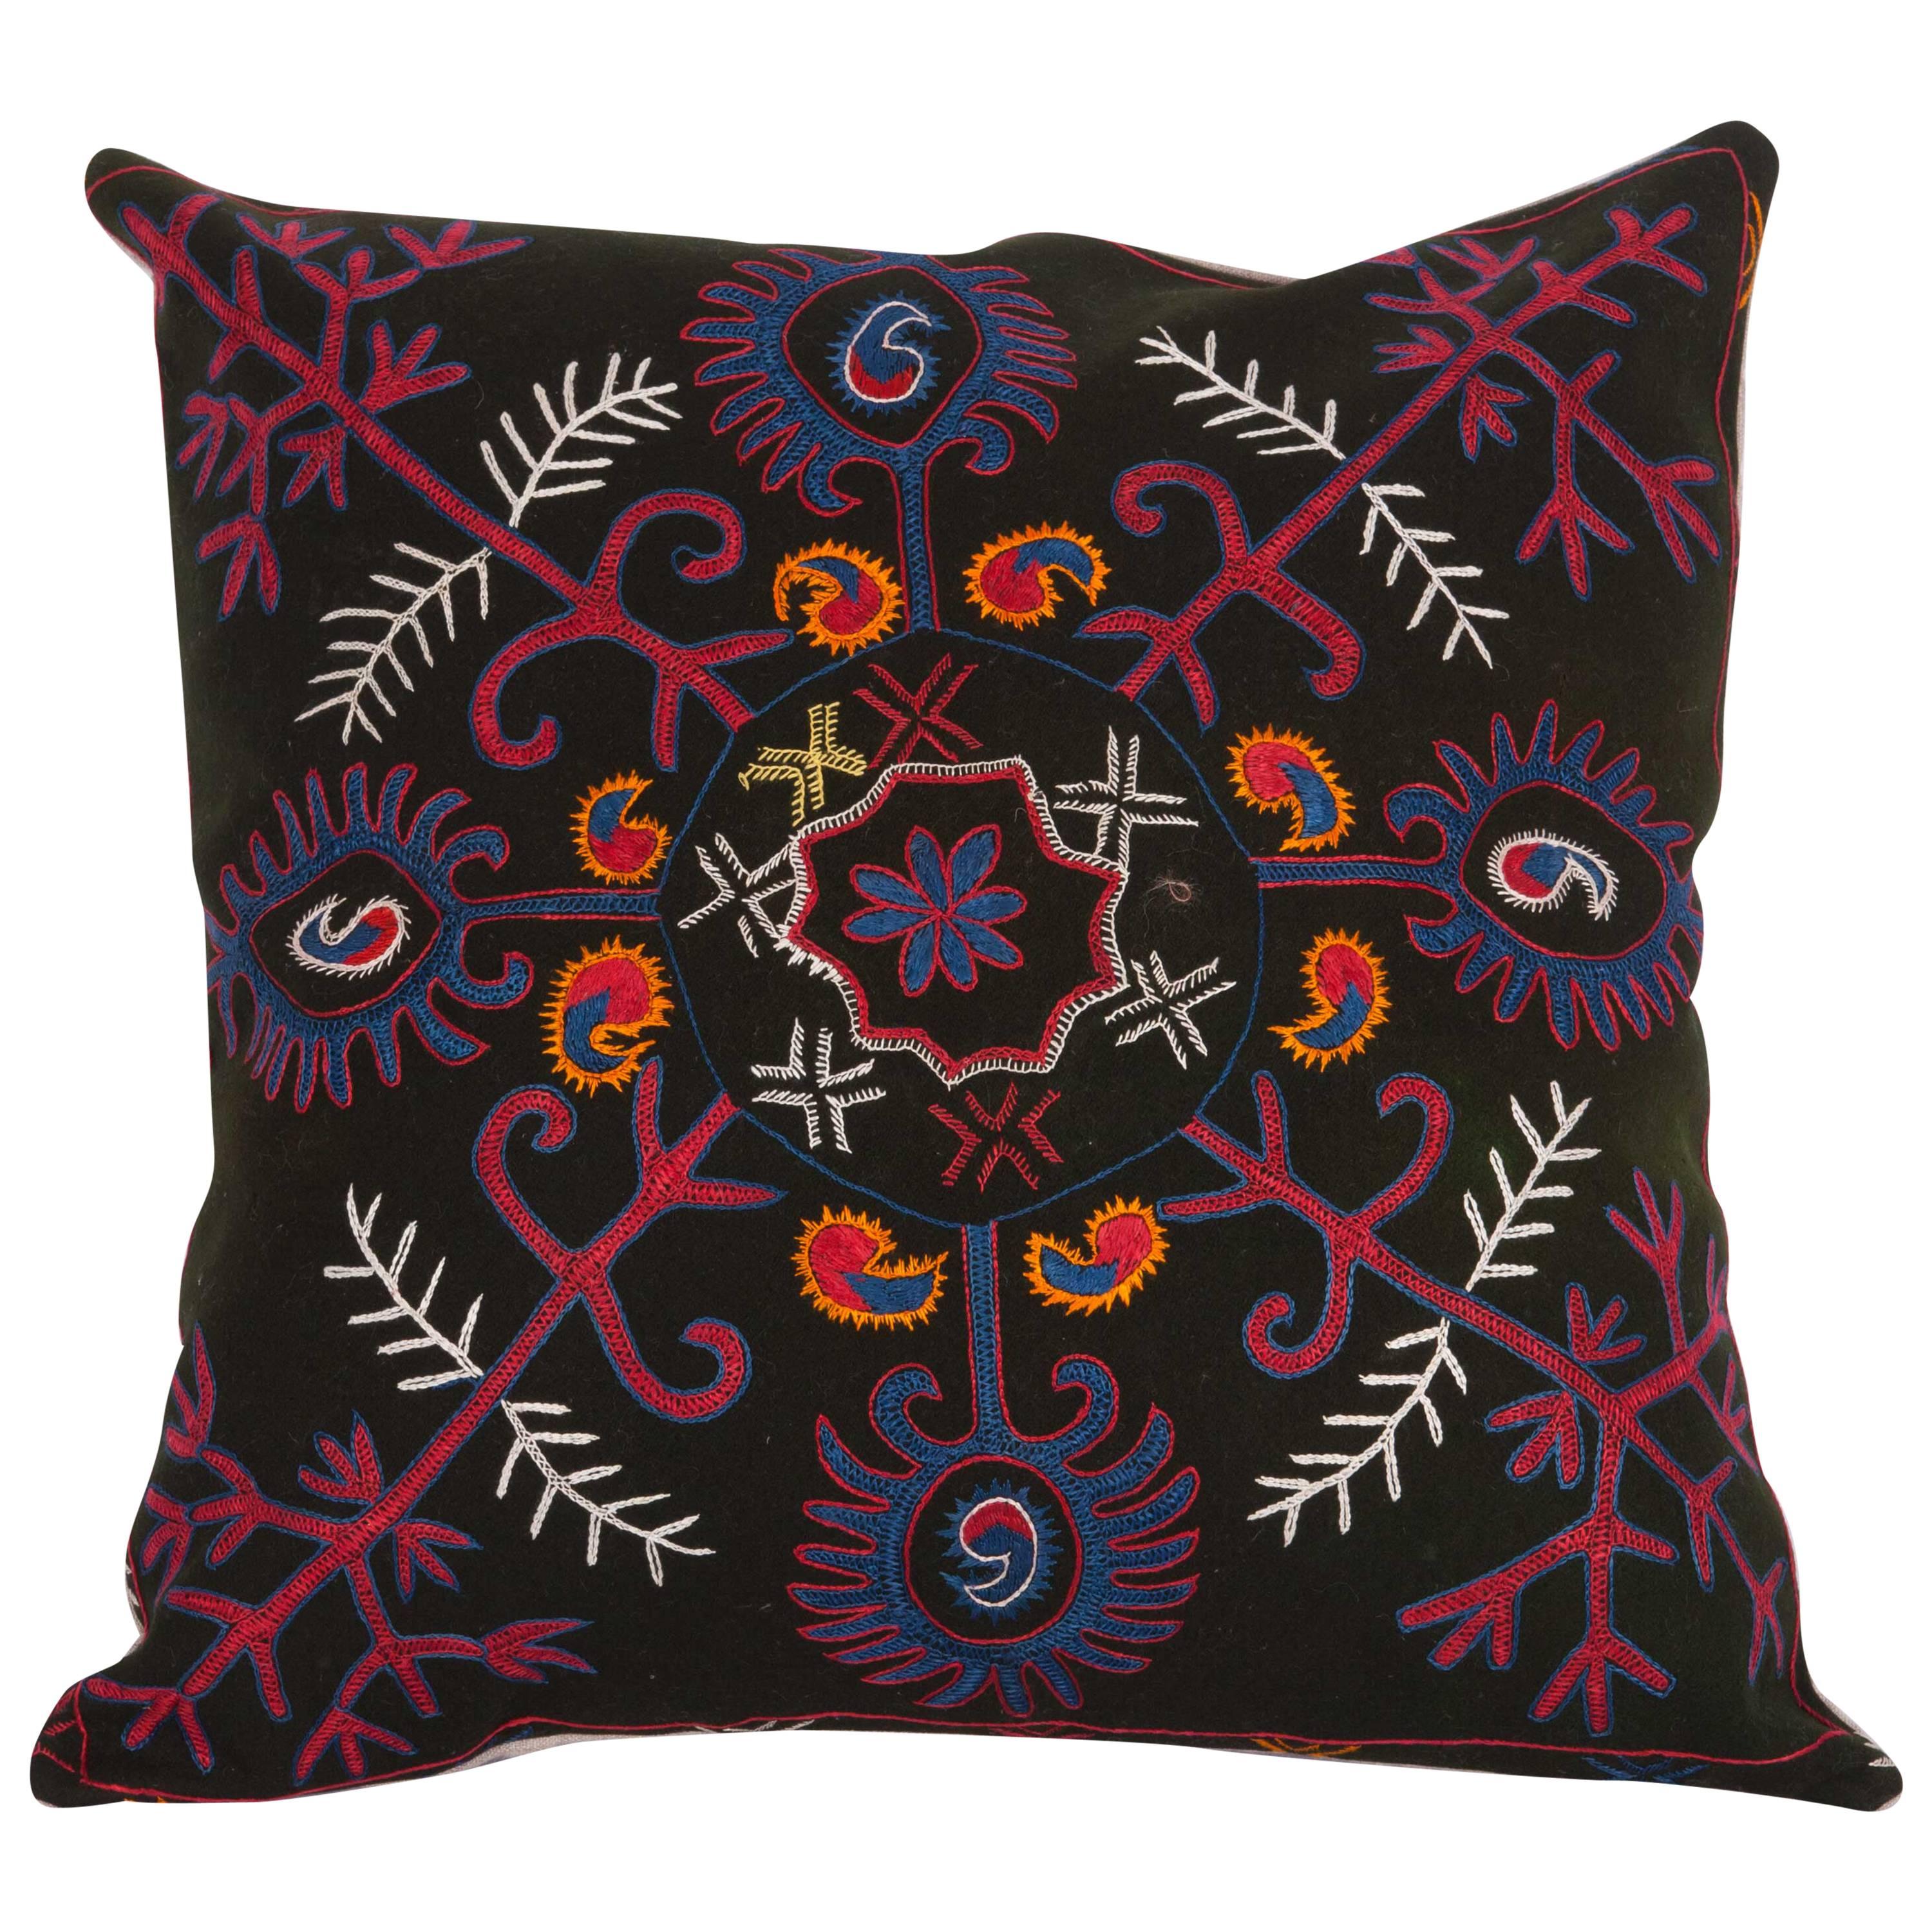 Pillow Made Out of an Early 20th Century Kyrgyz Embroidery